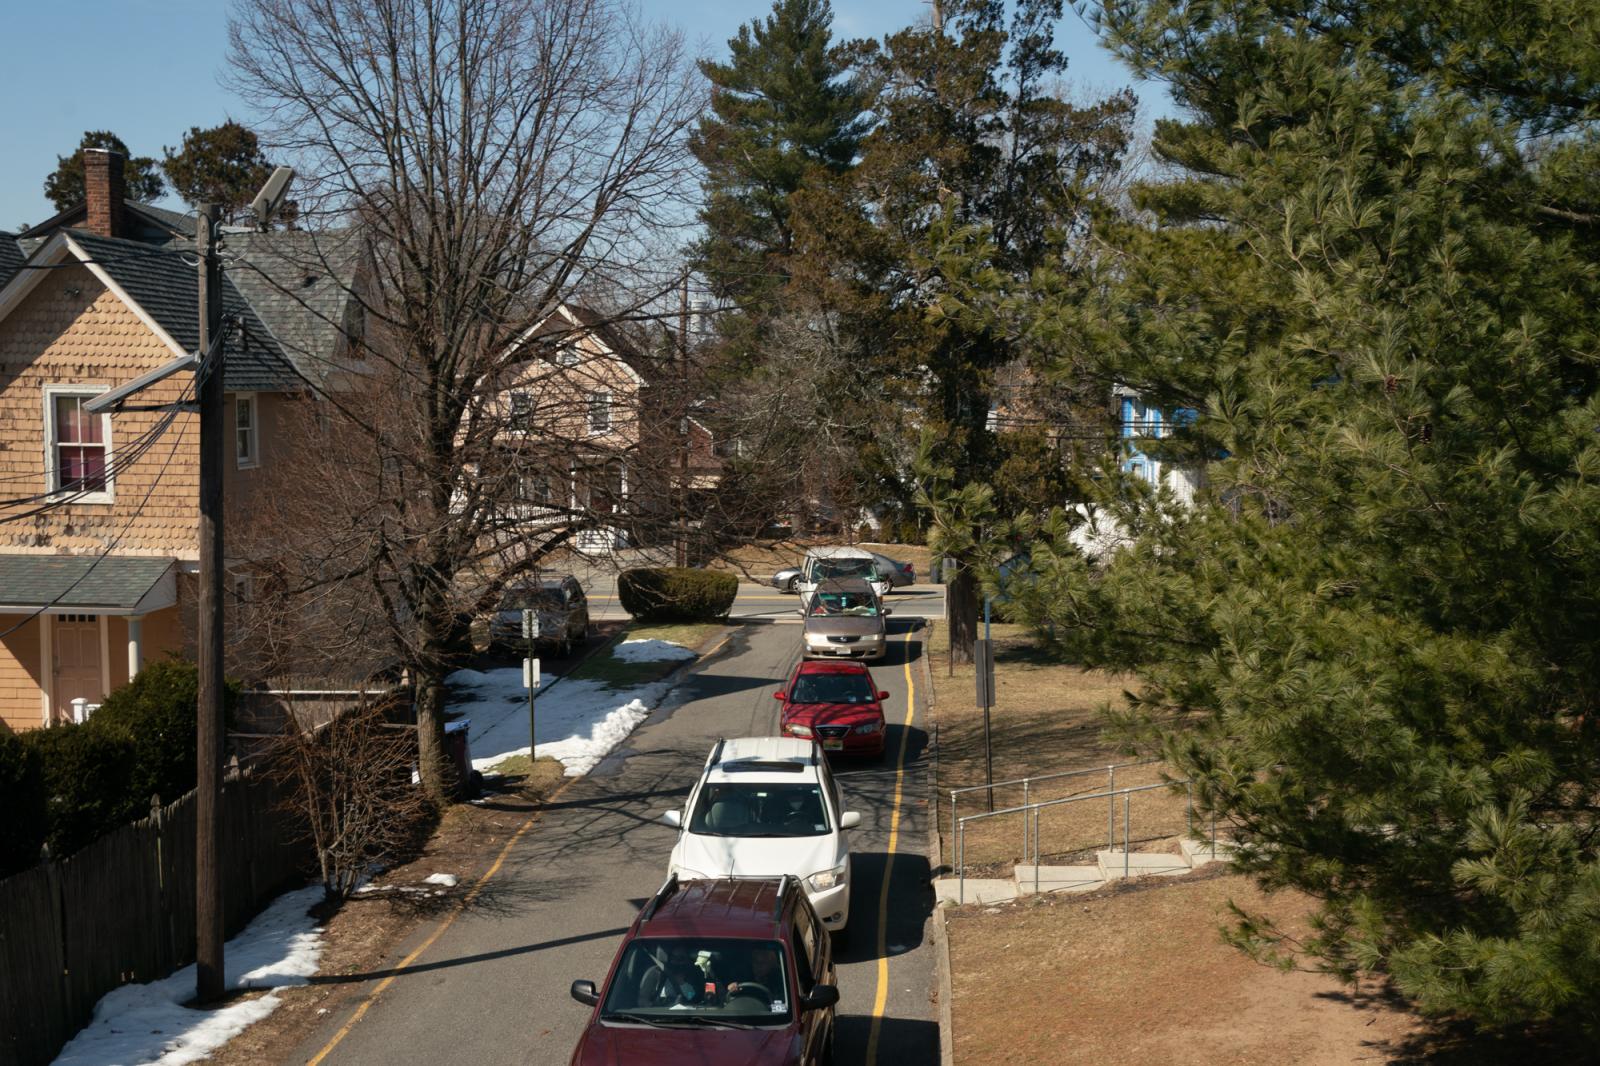 Cars line up to receive food bo...nglewood, NJ, on March 9, 2021.